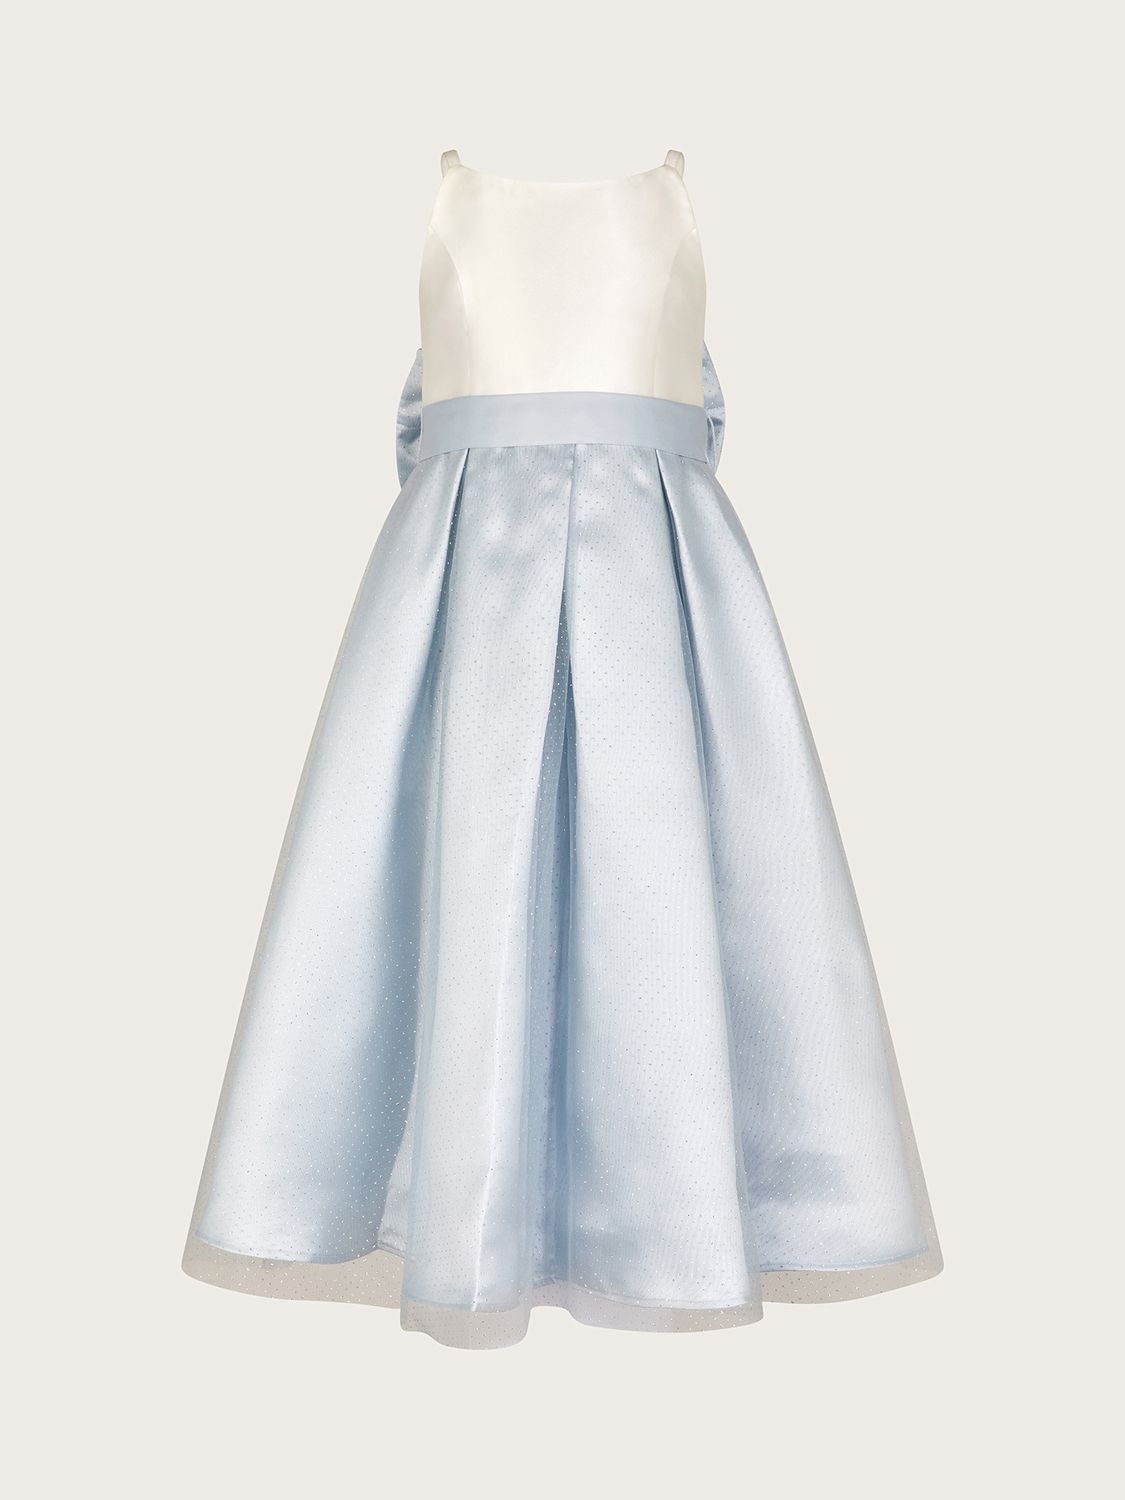 Monsoon Kids' Anastasia Glitter Tulle Bow Occasion Maxi Dress, Pale Blue, 14-15 years